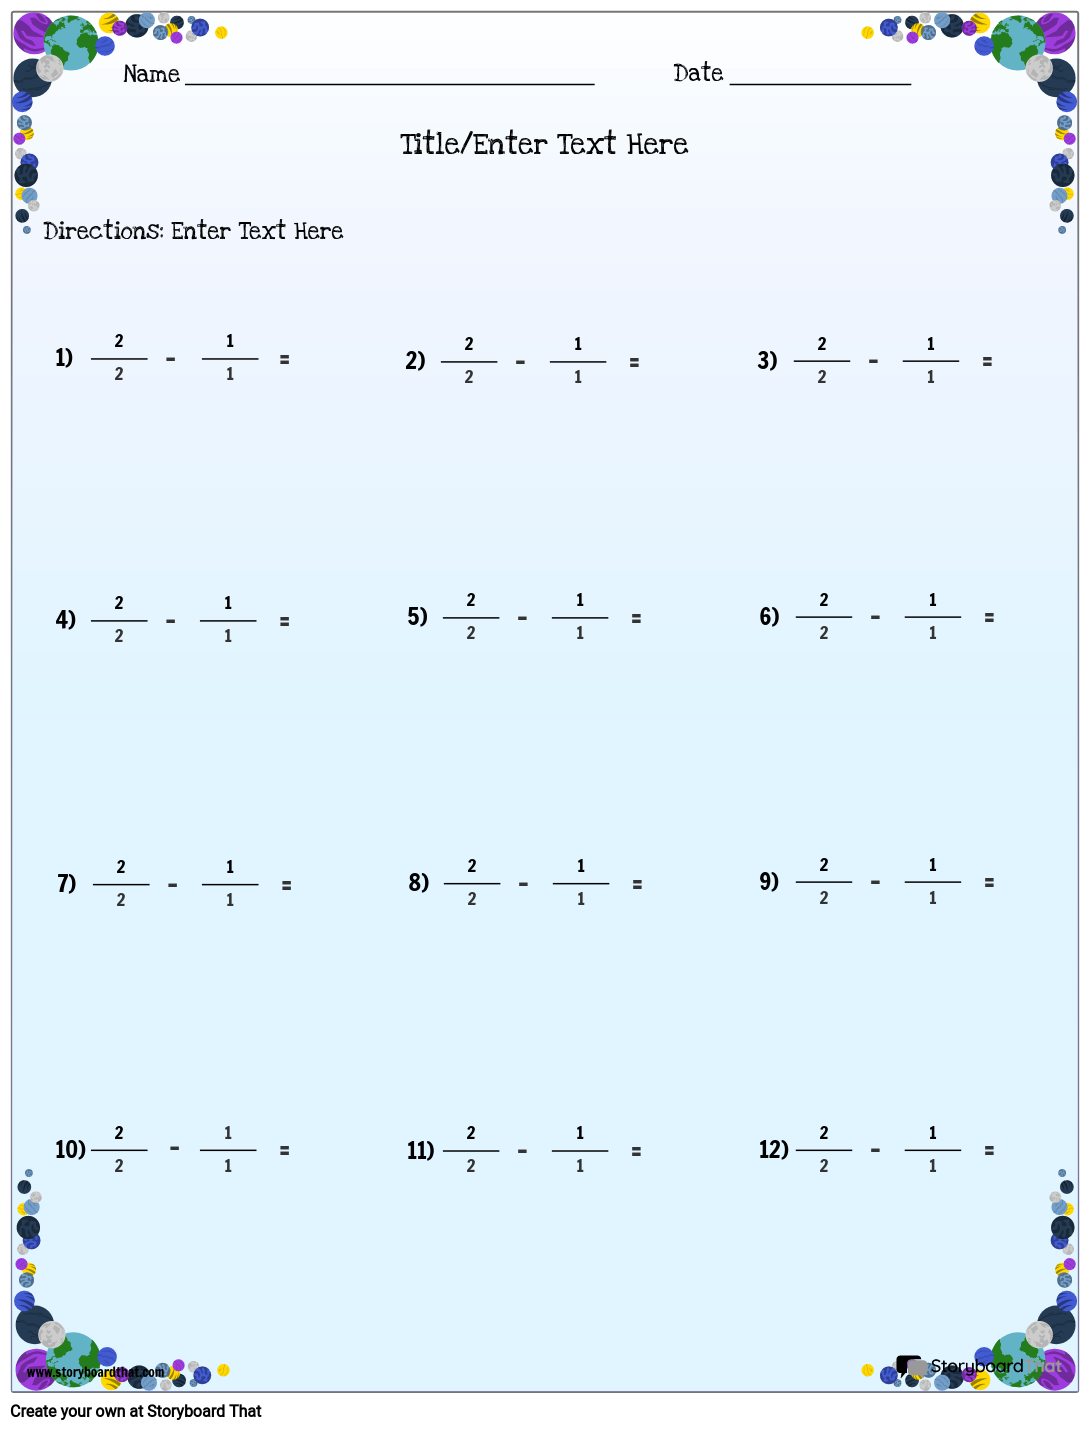 fractions-2-storyboard-by-worksheet-templates